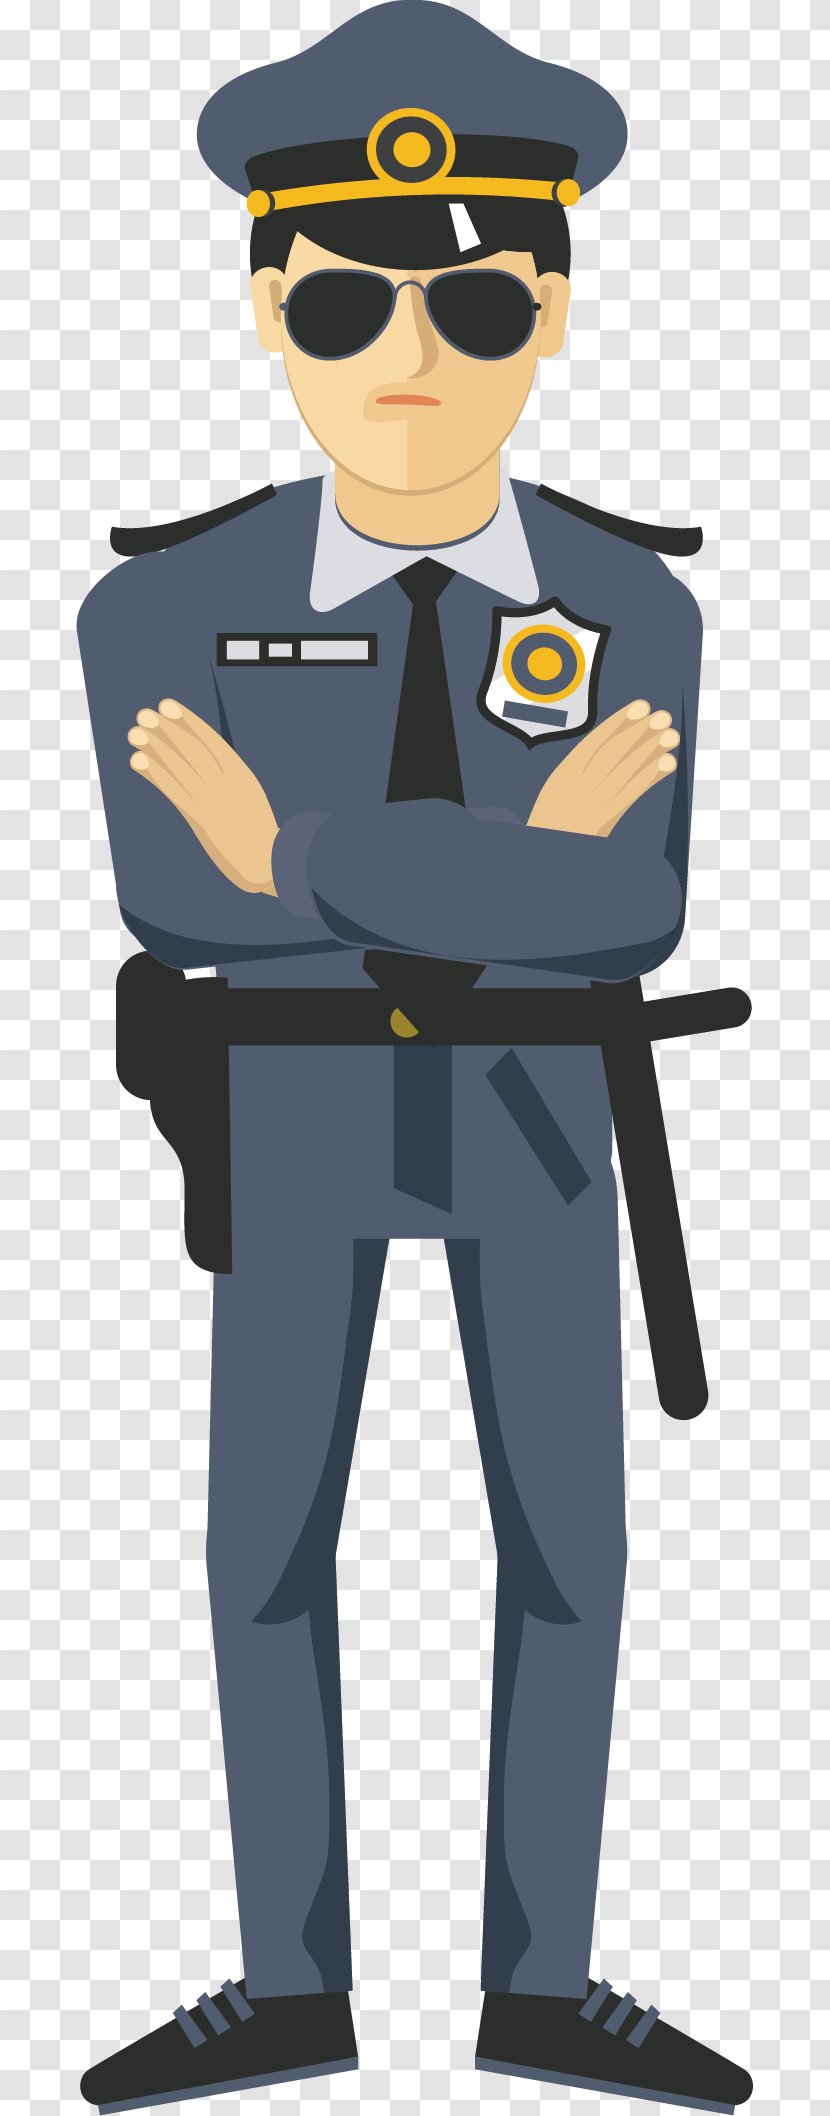 Police Officer Icon - Cartoon - Element Transparent PNG